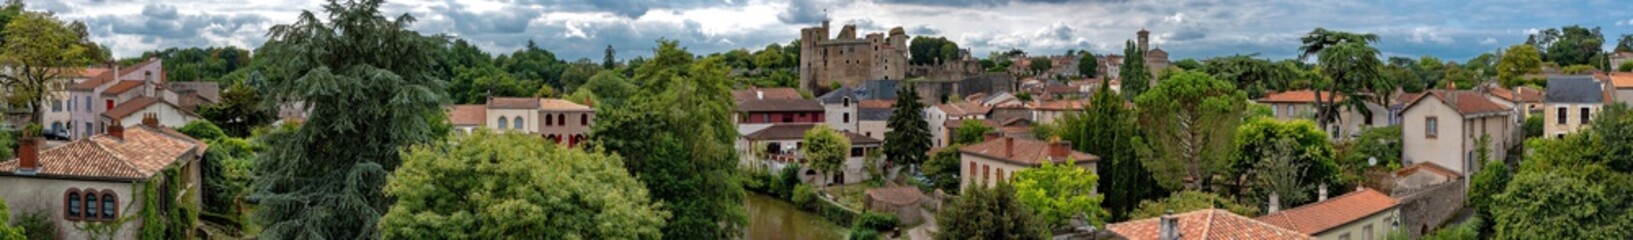 Panoramic view of Clisson village in France